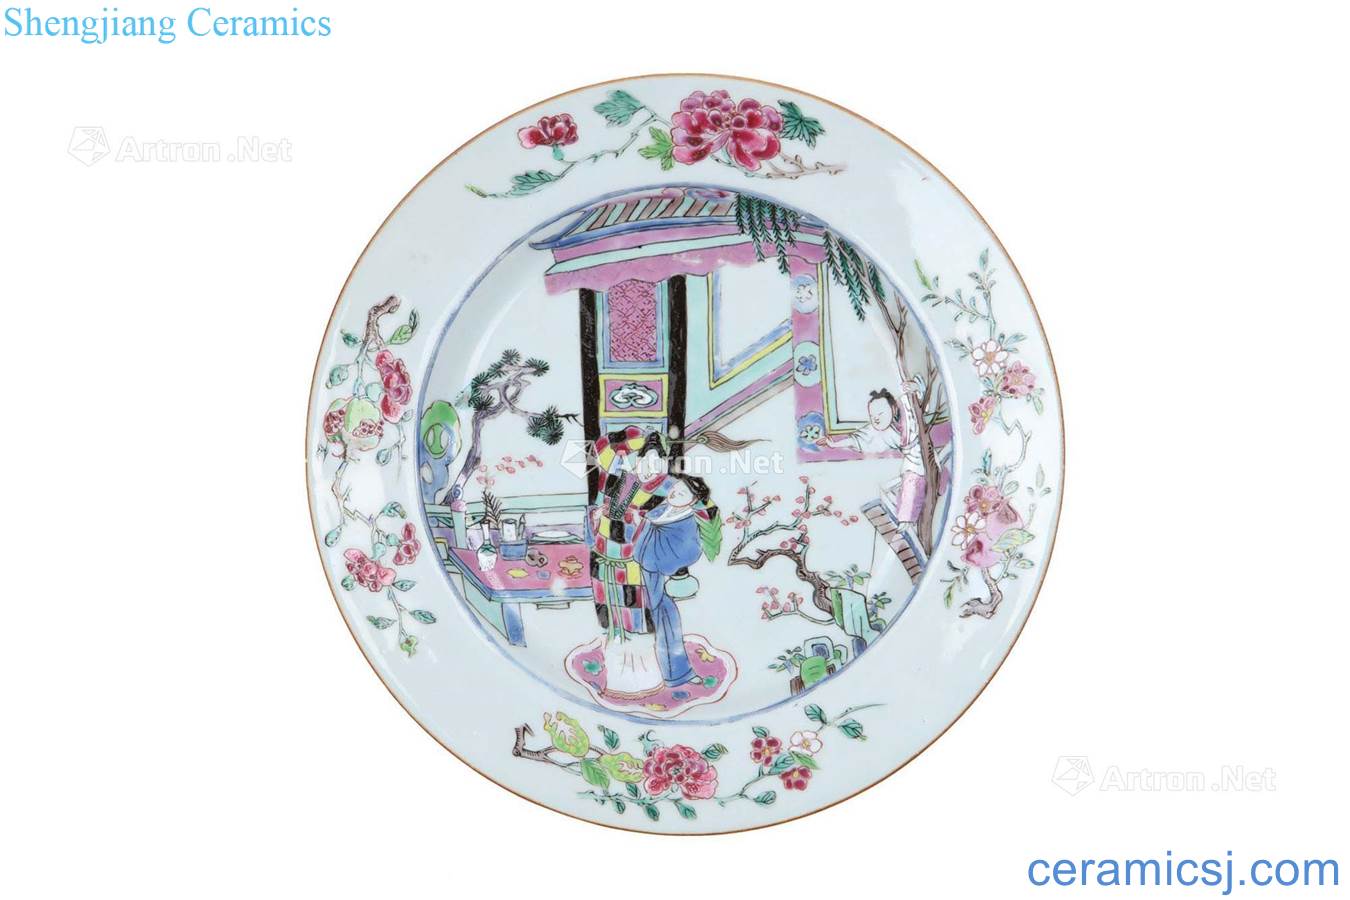 Qing dynasty about 1740 years pastel character design of tray